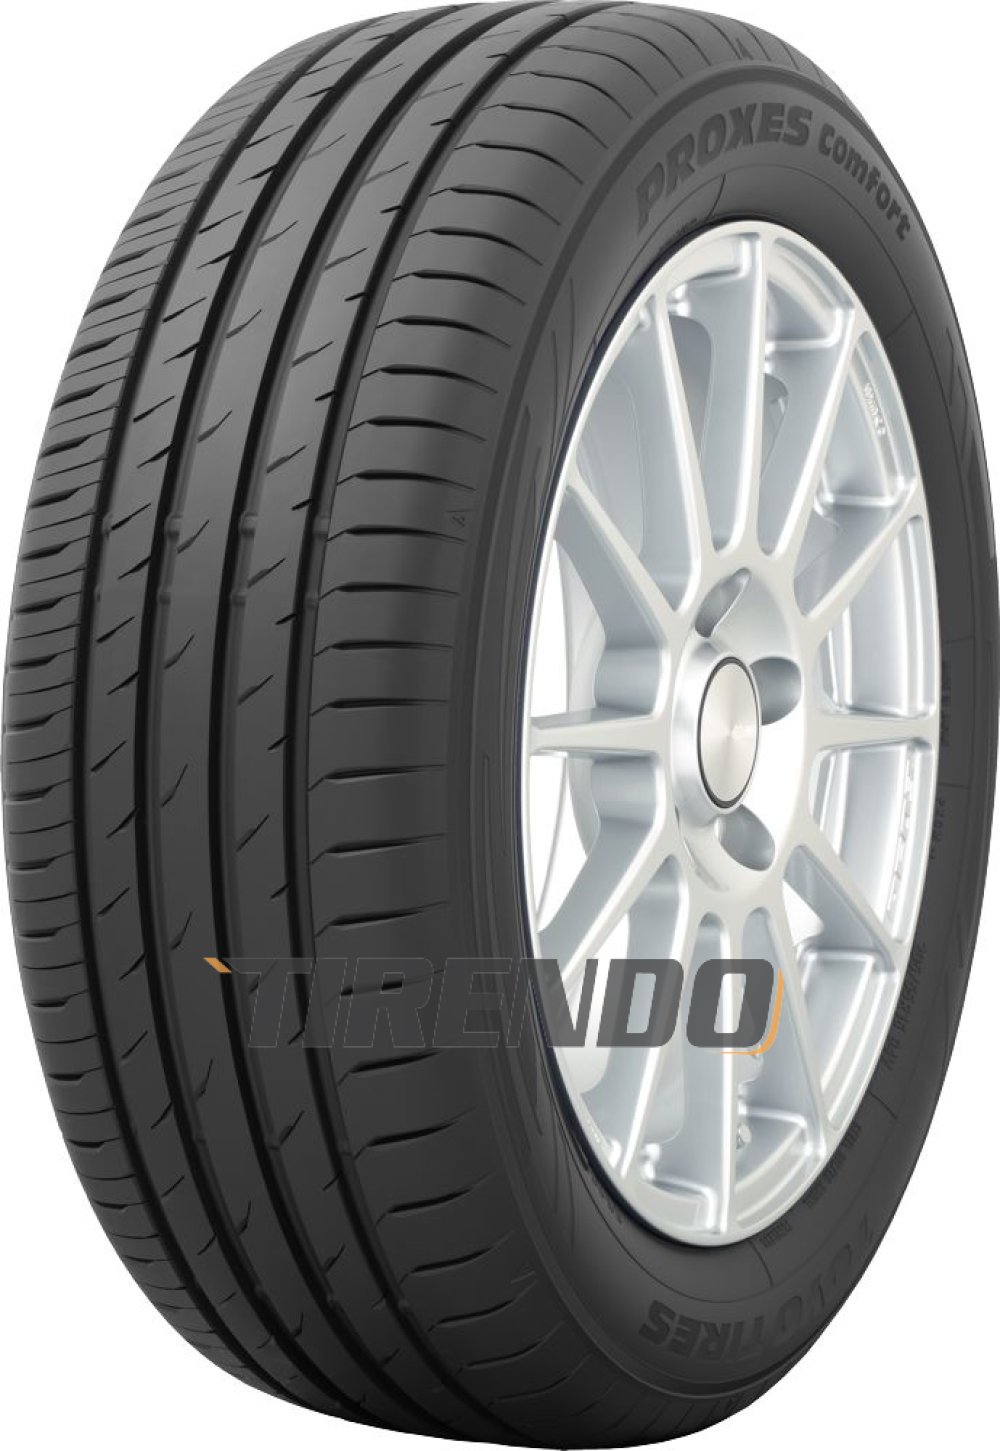 Image of Toyo Proxes Comfort ( 185/65 R15 92H XL )